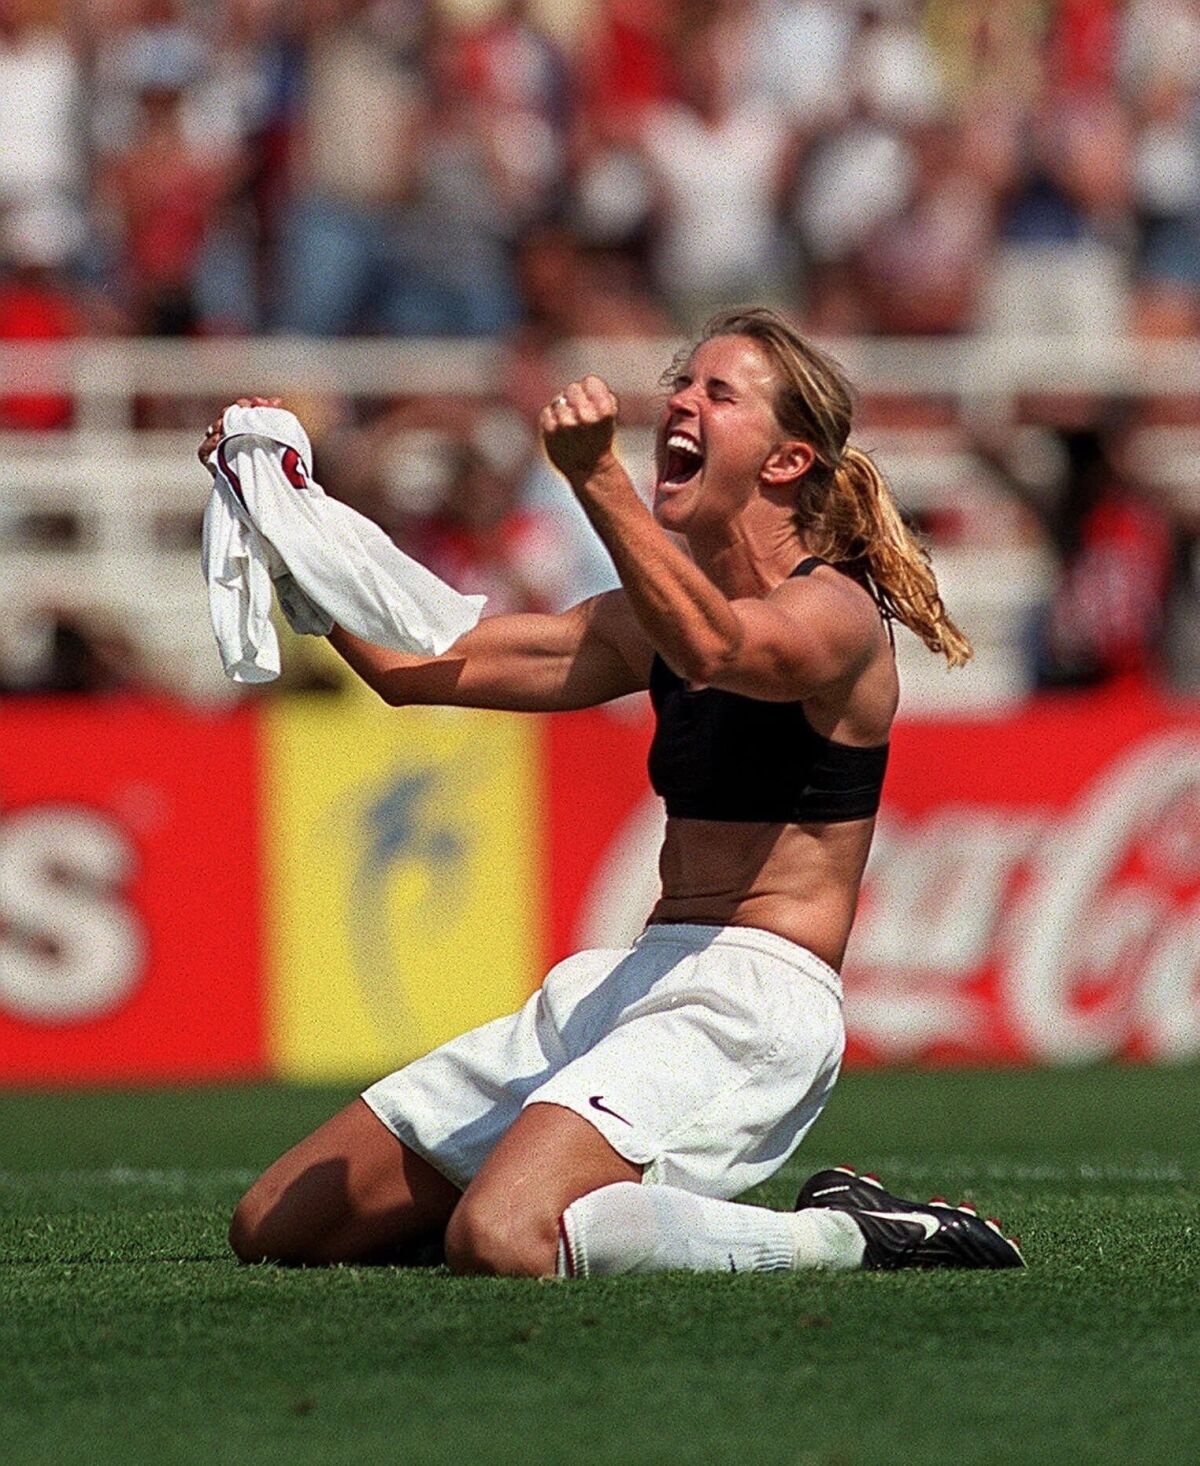 Brandi Chastain reacts to her penalty kick that won the 1999 World Cup for the U.S. women's national team in a game against China at the Rose Bowl in Pasadena.